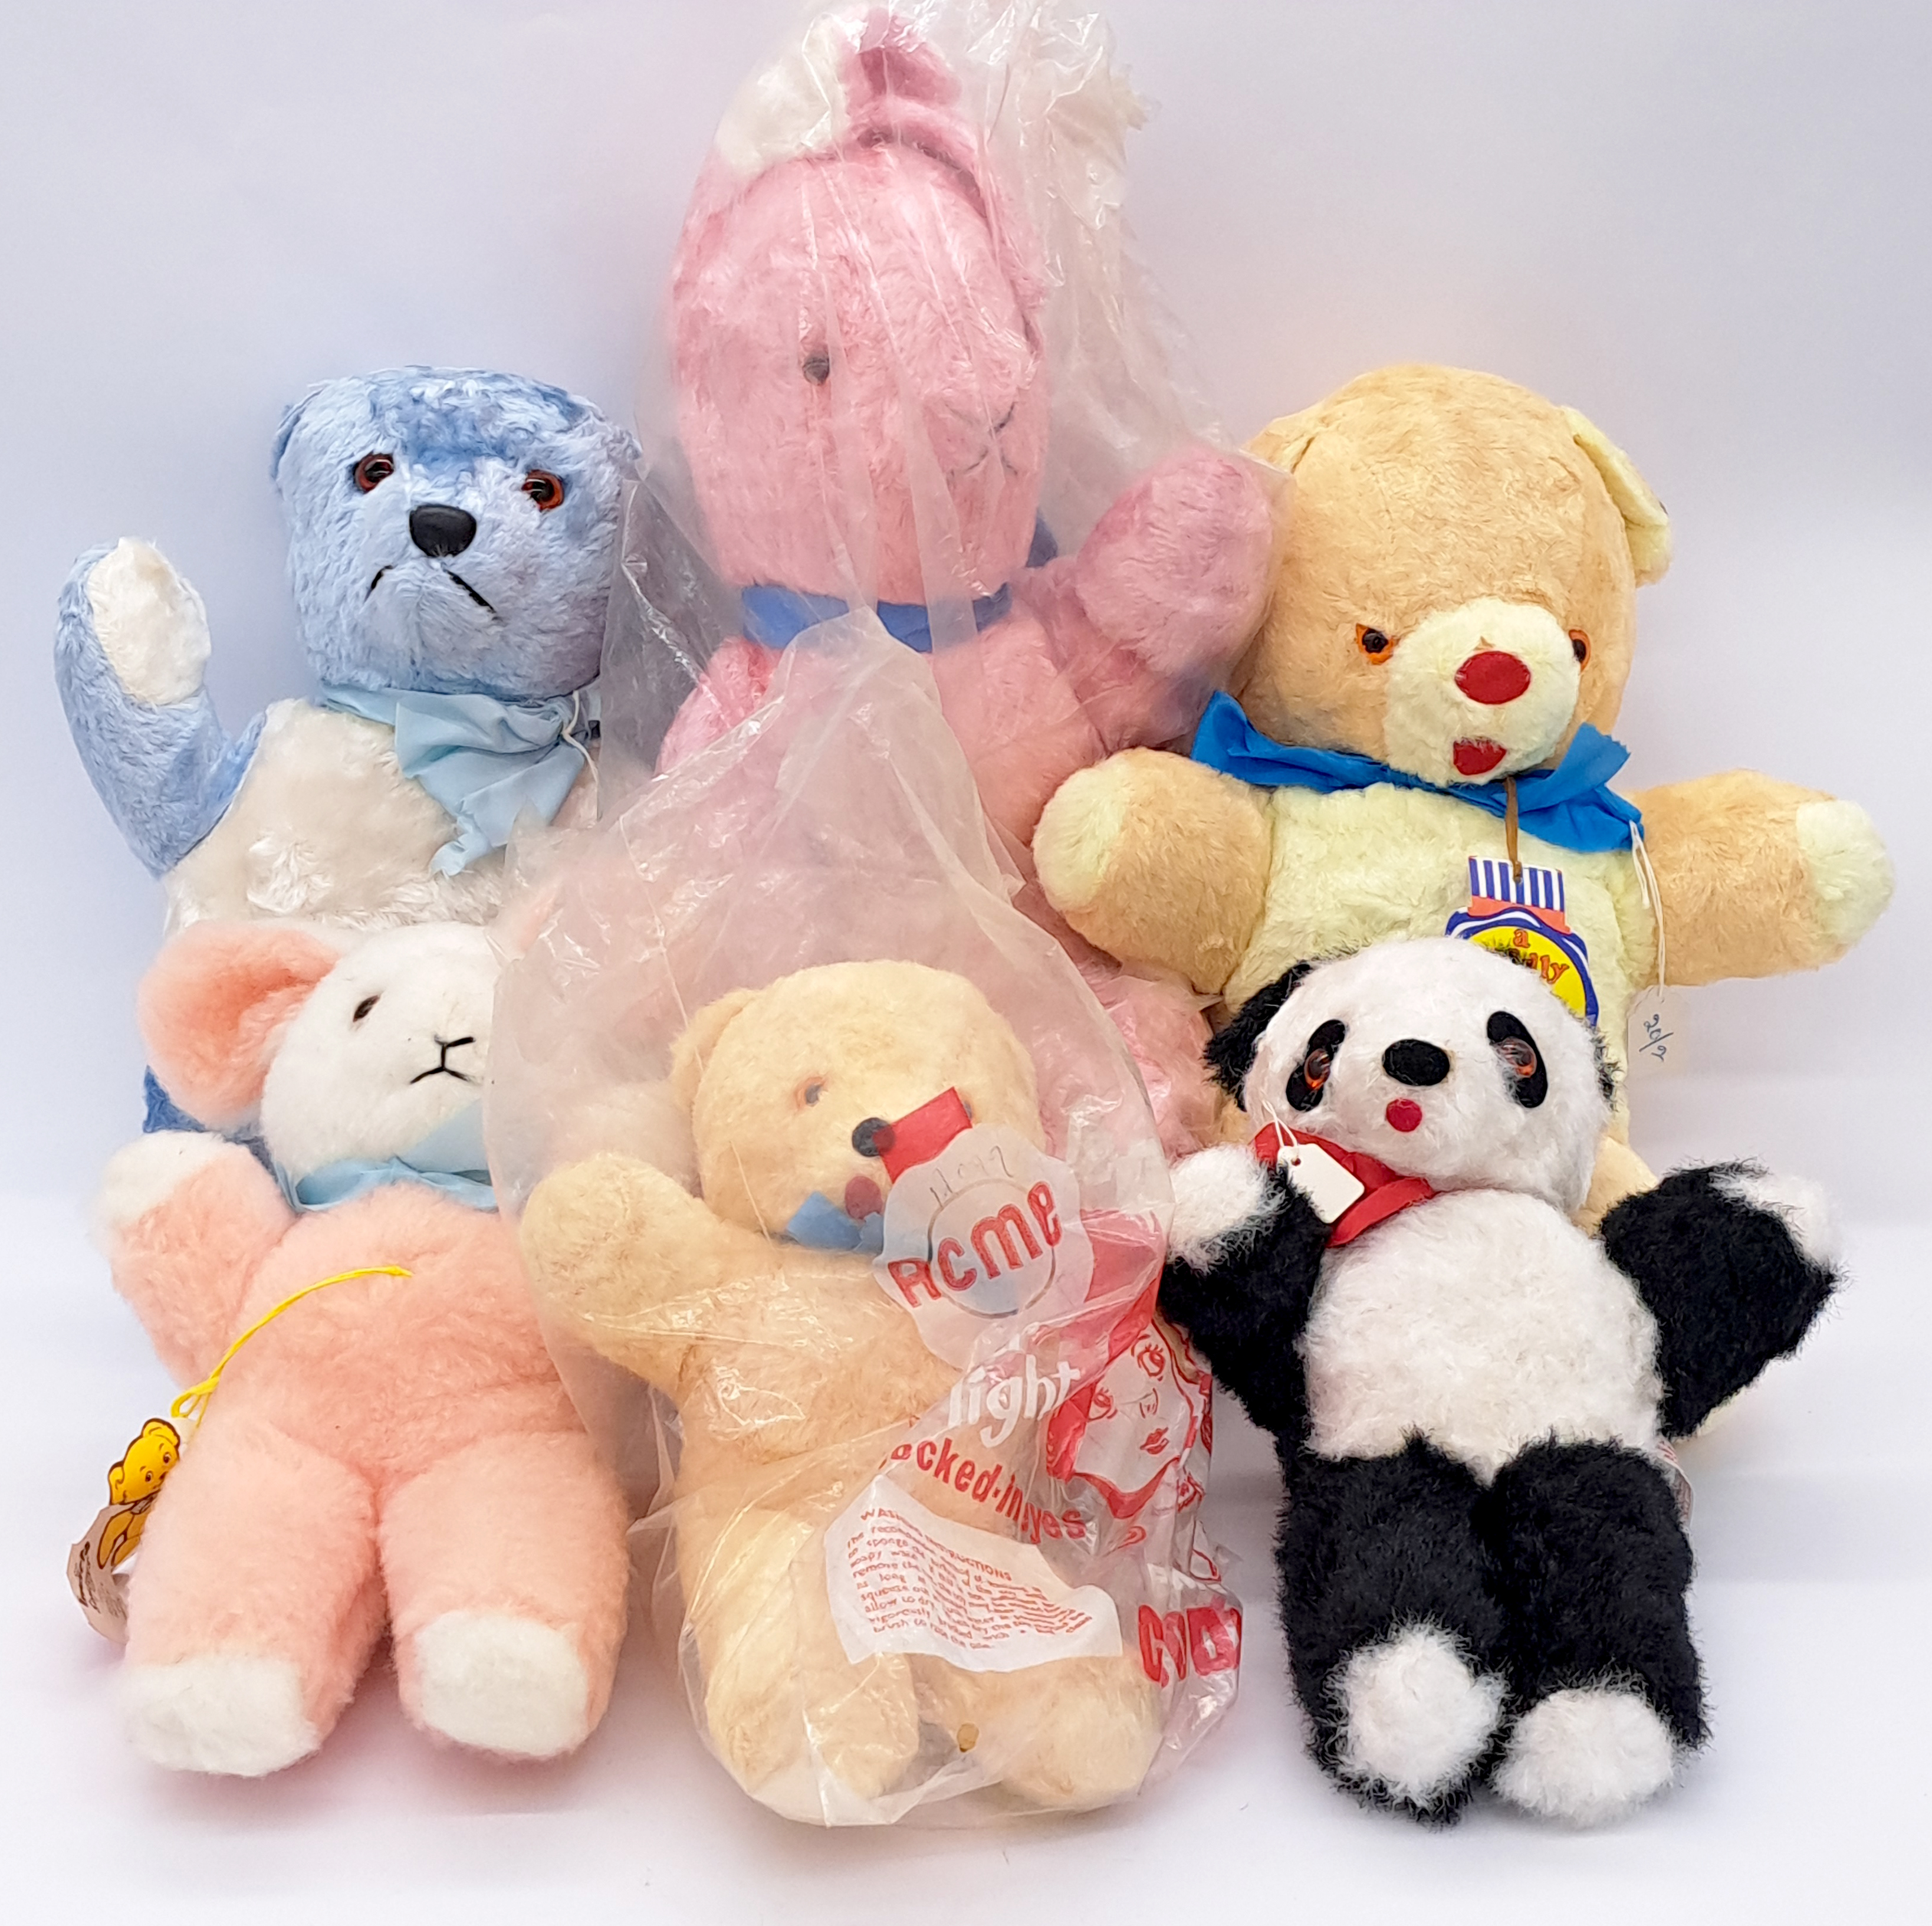 Assortment of vintage unjointed teddy bears, including Invicta and Acme